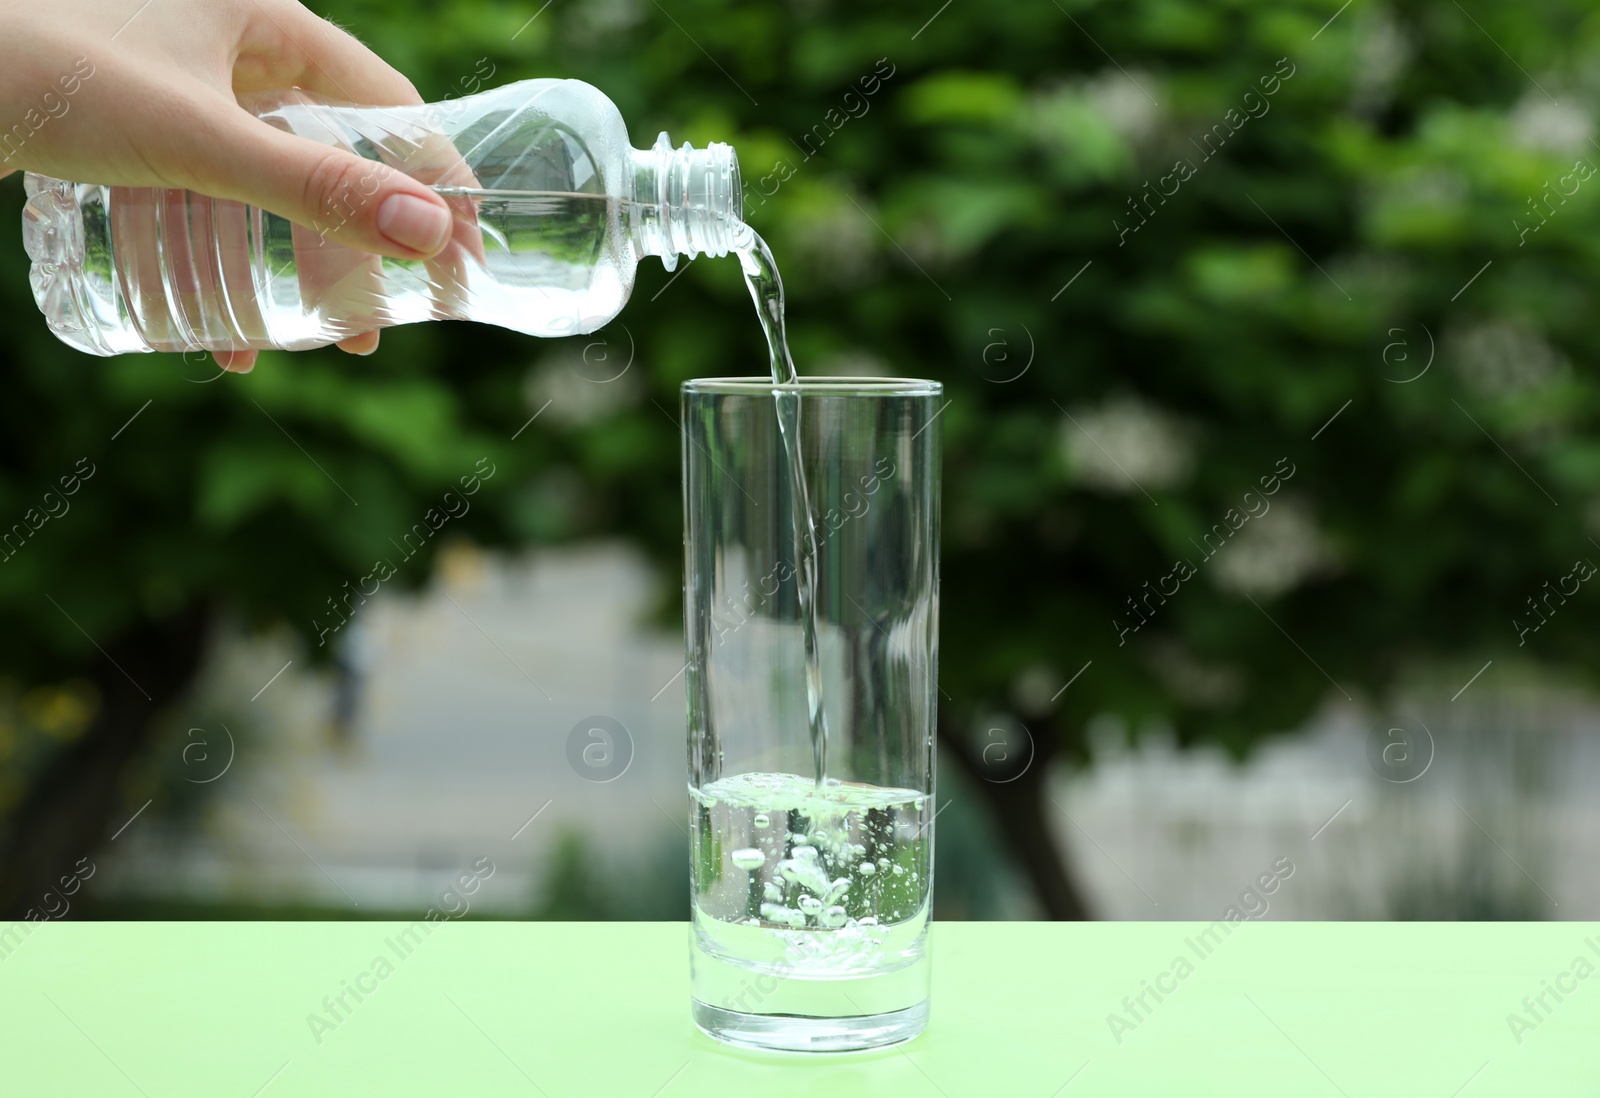 Photo of Woman pouring water from bottle into glass on table outdoors, closeup